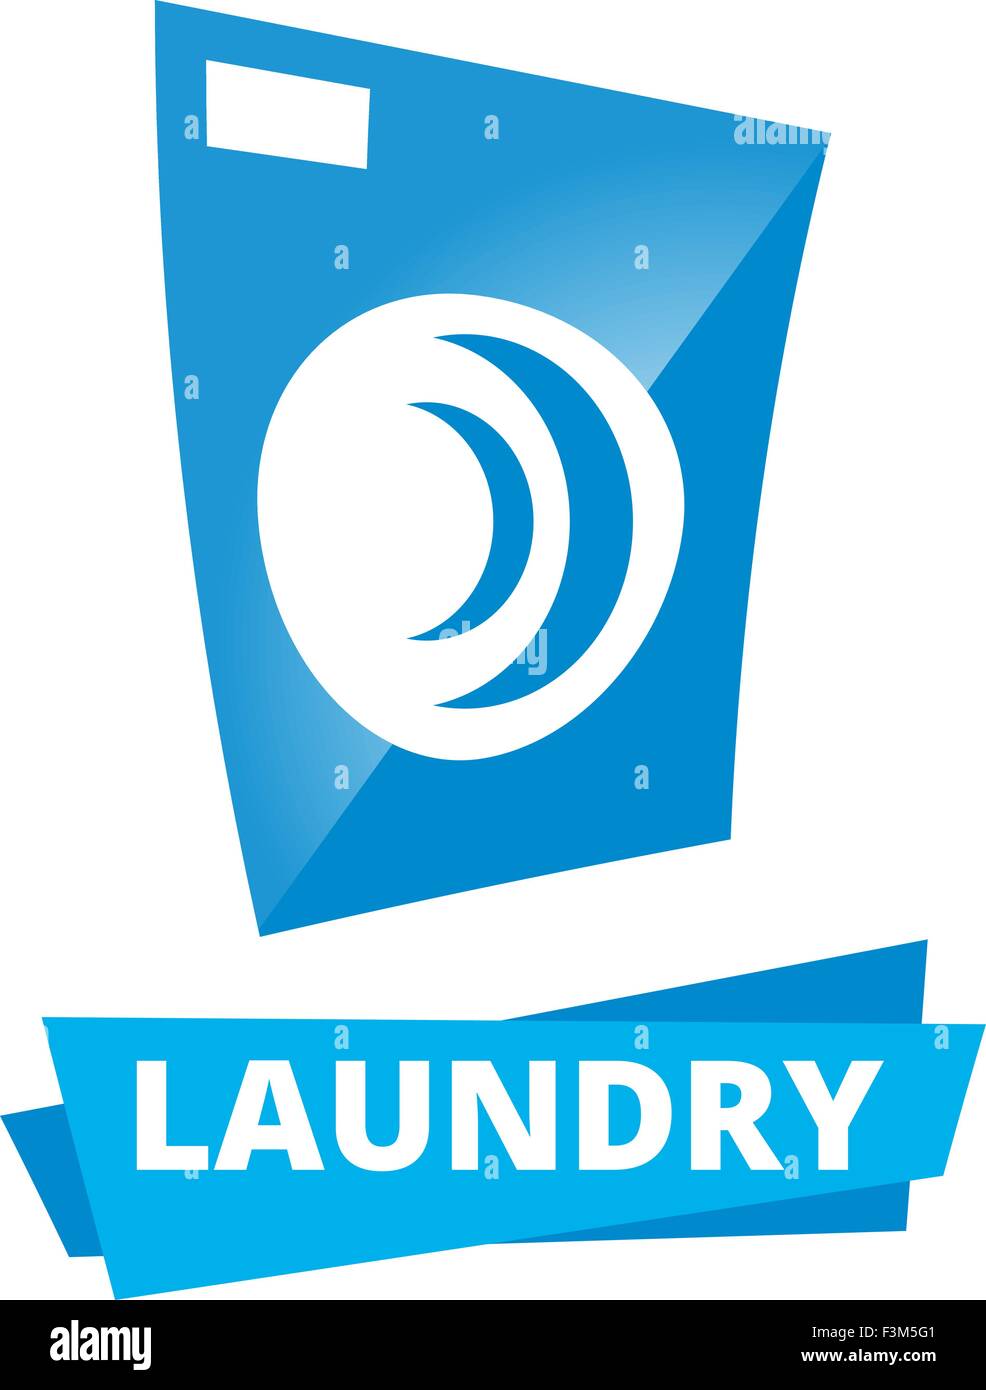 Laundry logo template with blue washing machine Stock Vector